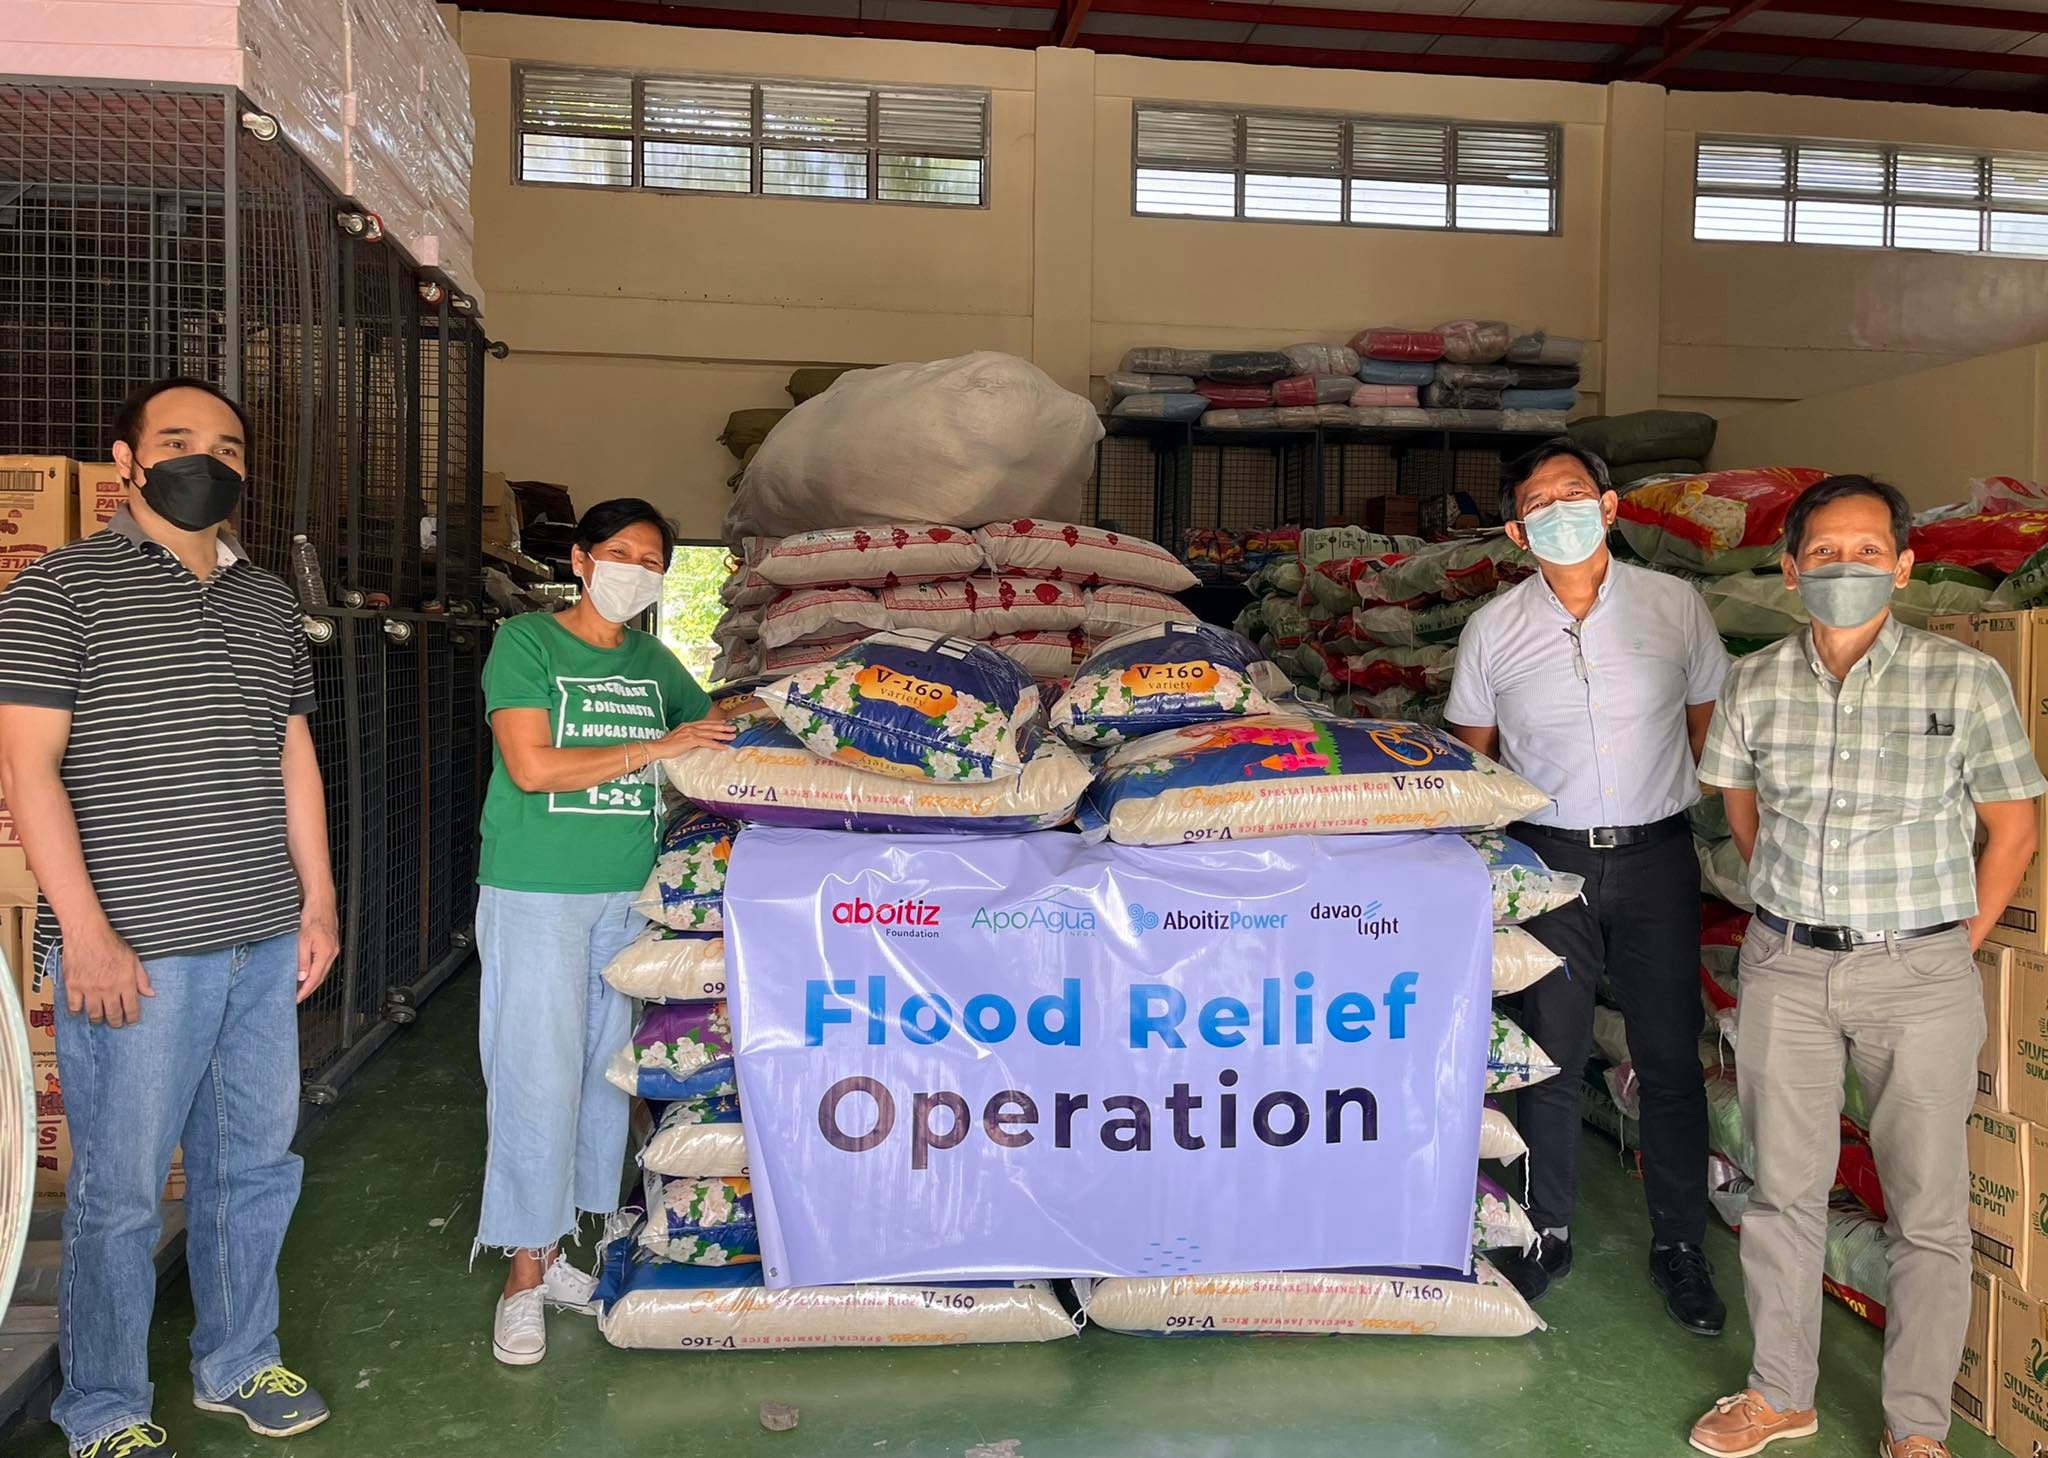 Davao City and Sto. Tomas affected by flooding received support